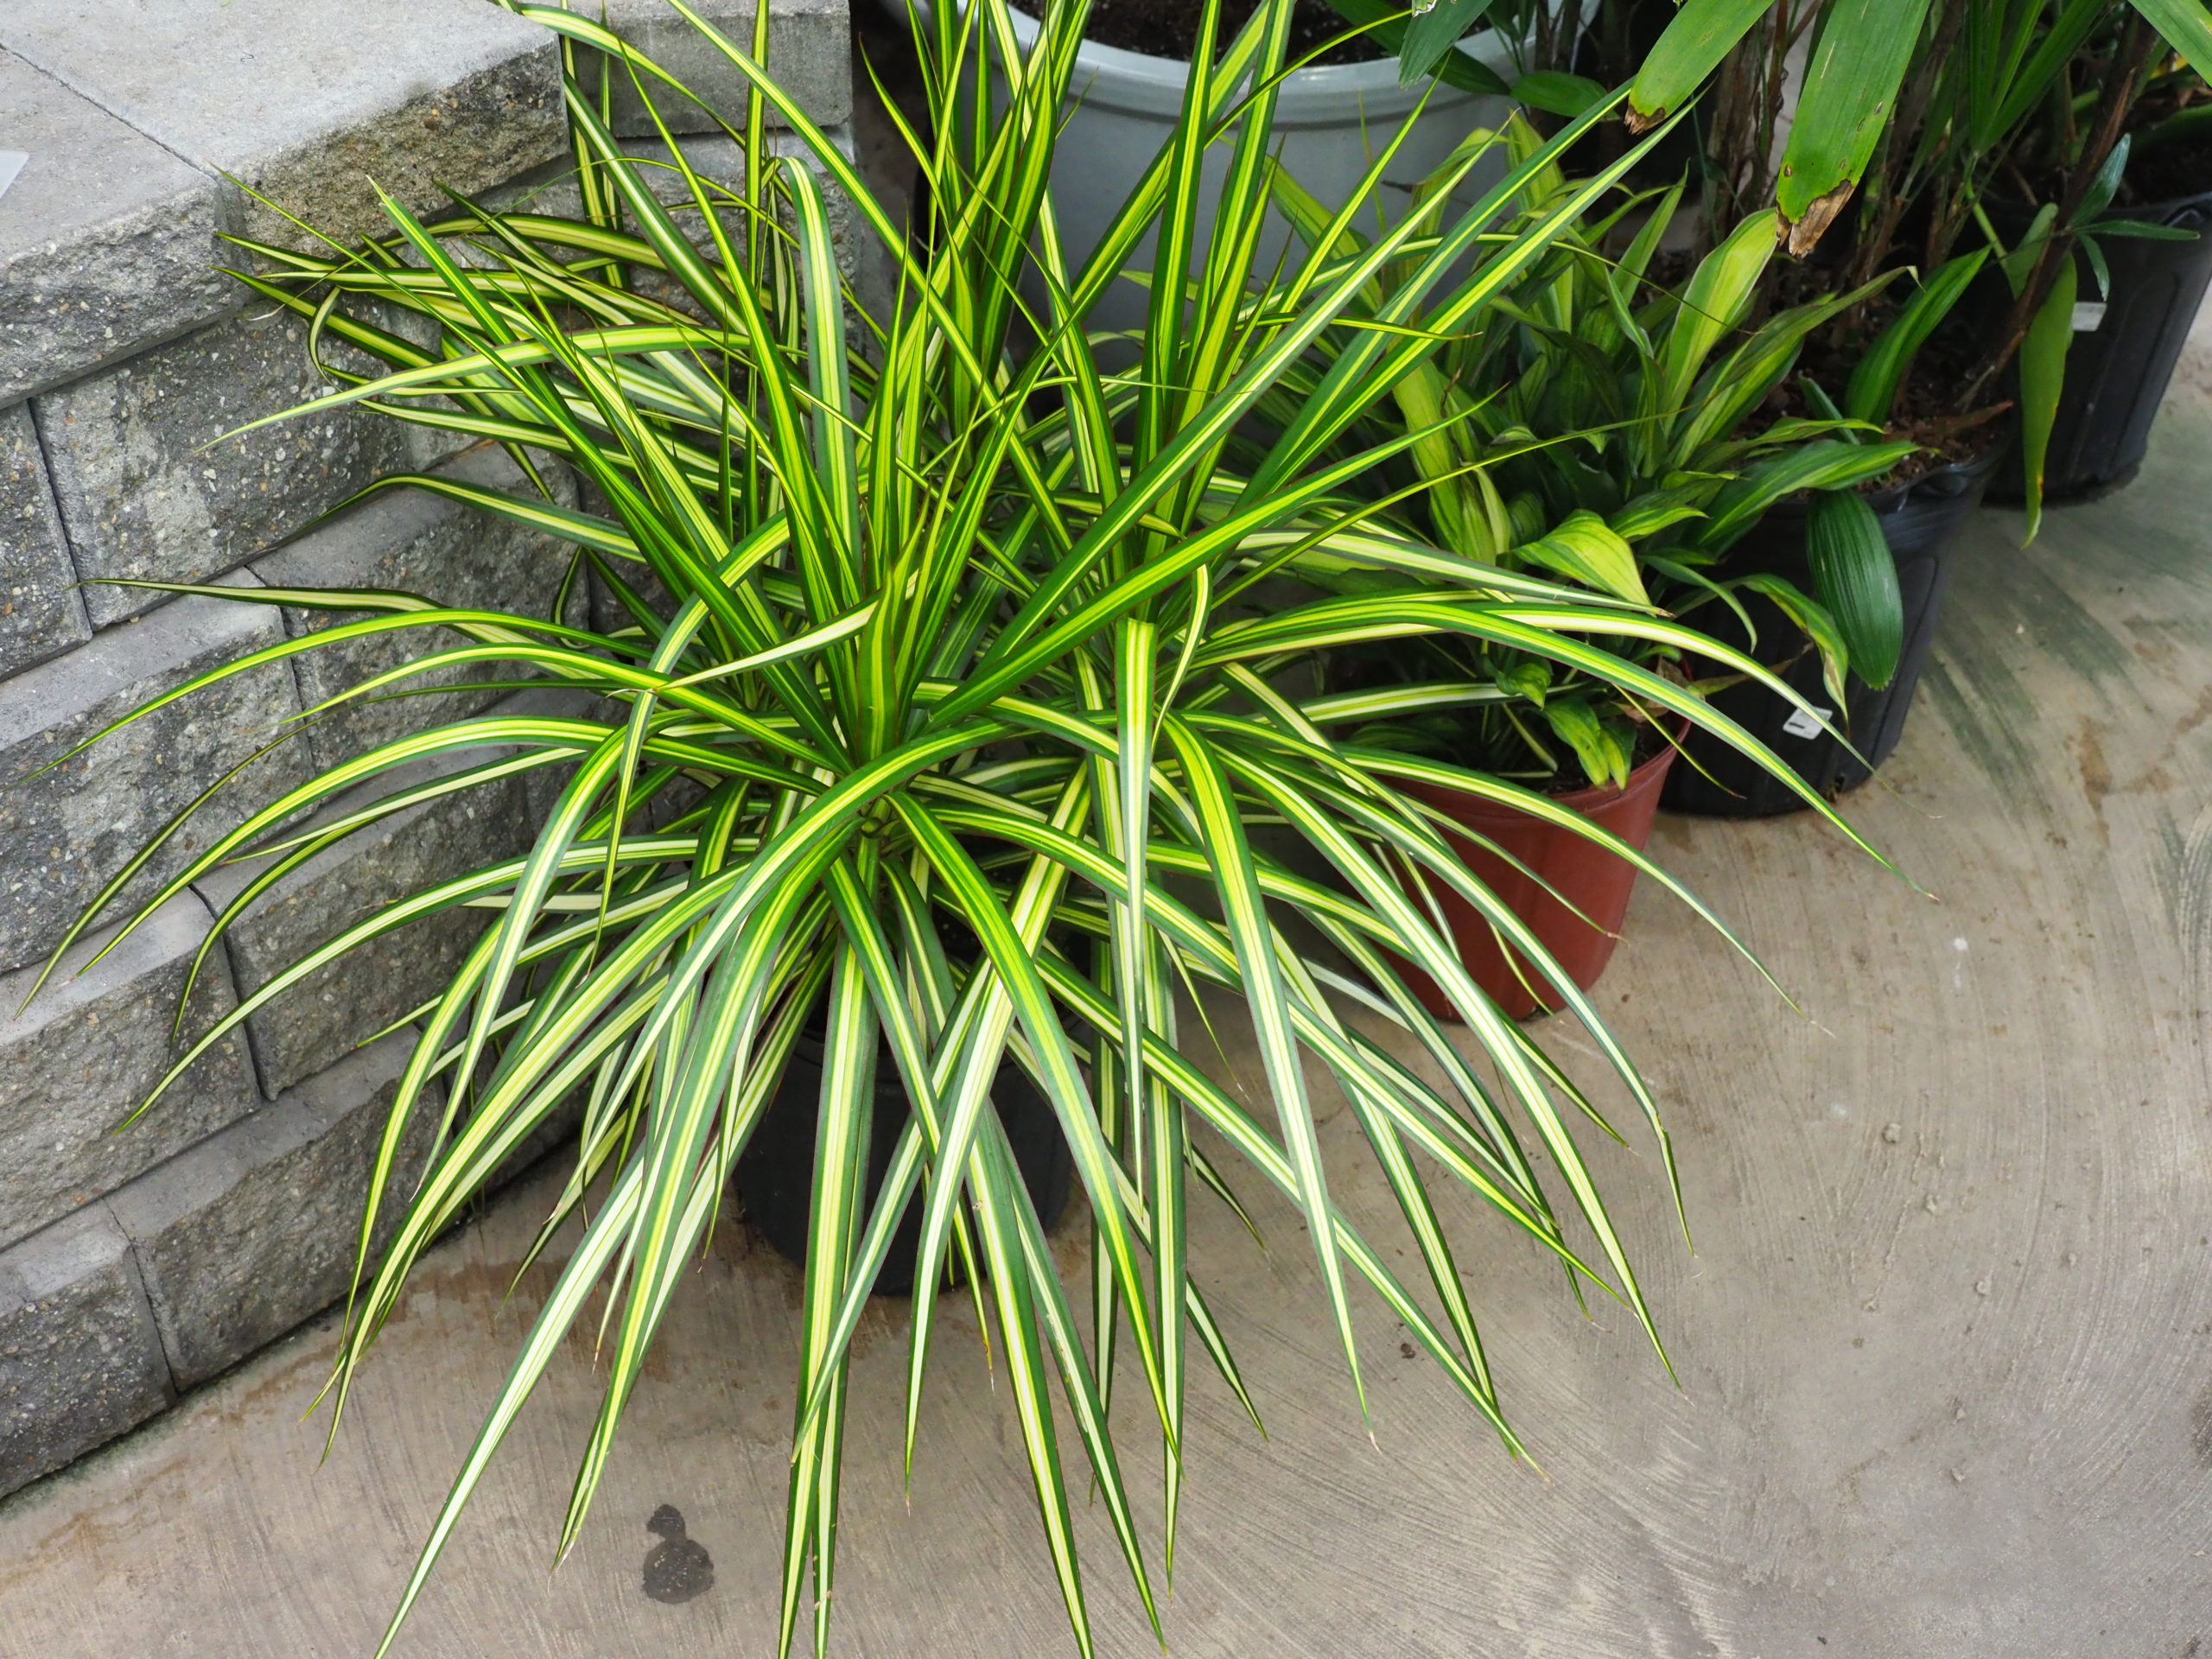 Among the Dracaenas, the marginata types make great houseplants. The species has green foliage with reddish margins in good light. Others, like this variety, can be green and white, while the Tricolor is cream, red and white and slower growing. When they get too tall they can be “topped,” resulting in branching stems.